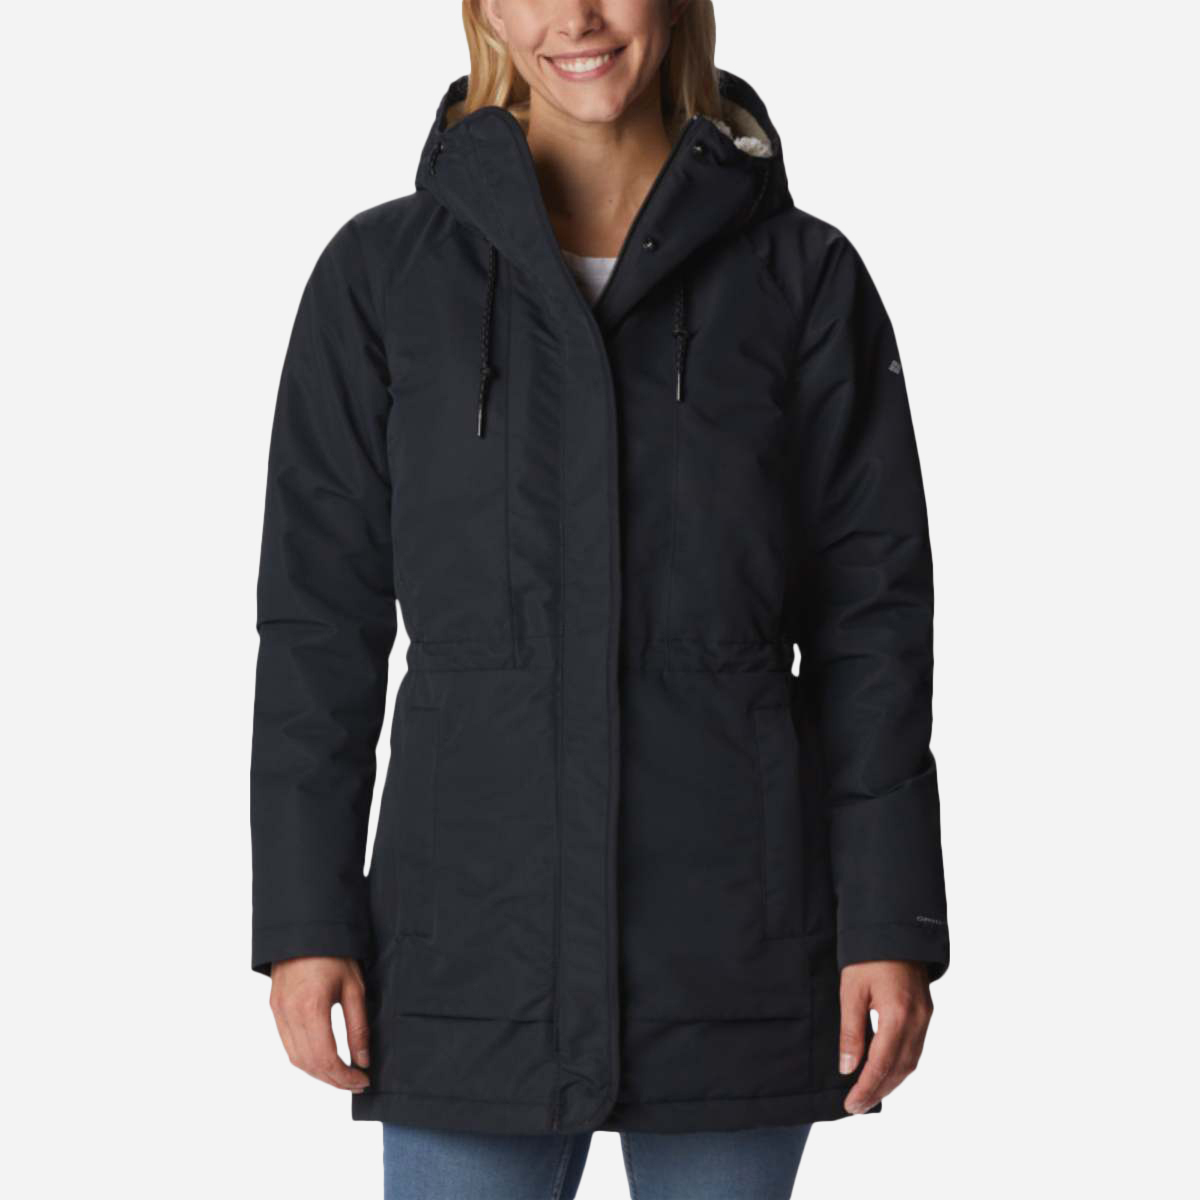 AN304869 South Canyon Sherpa Lined Jacket